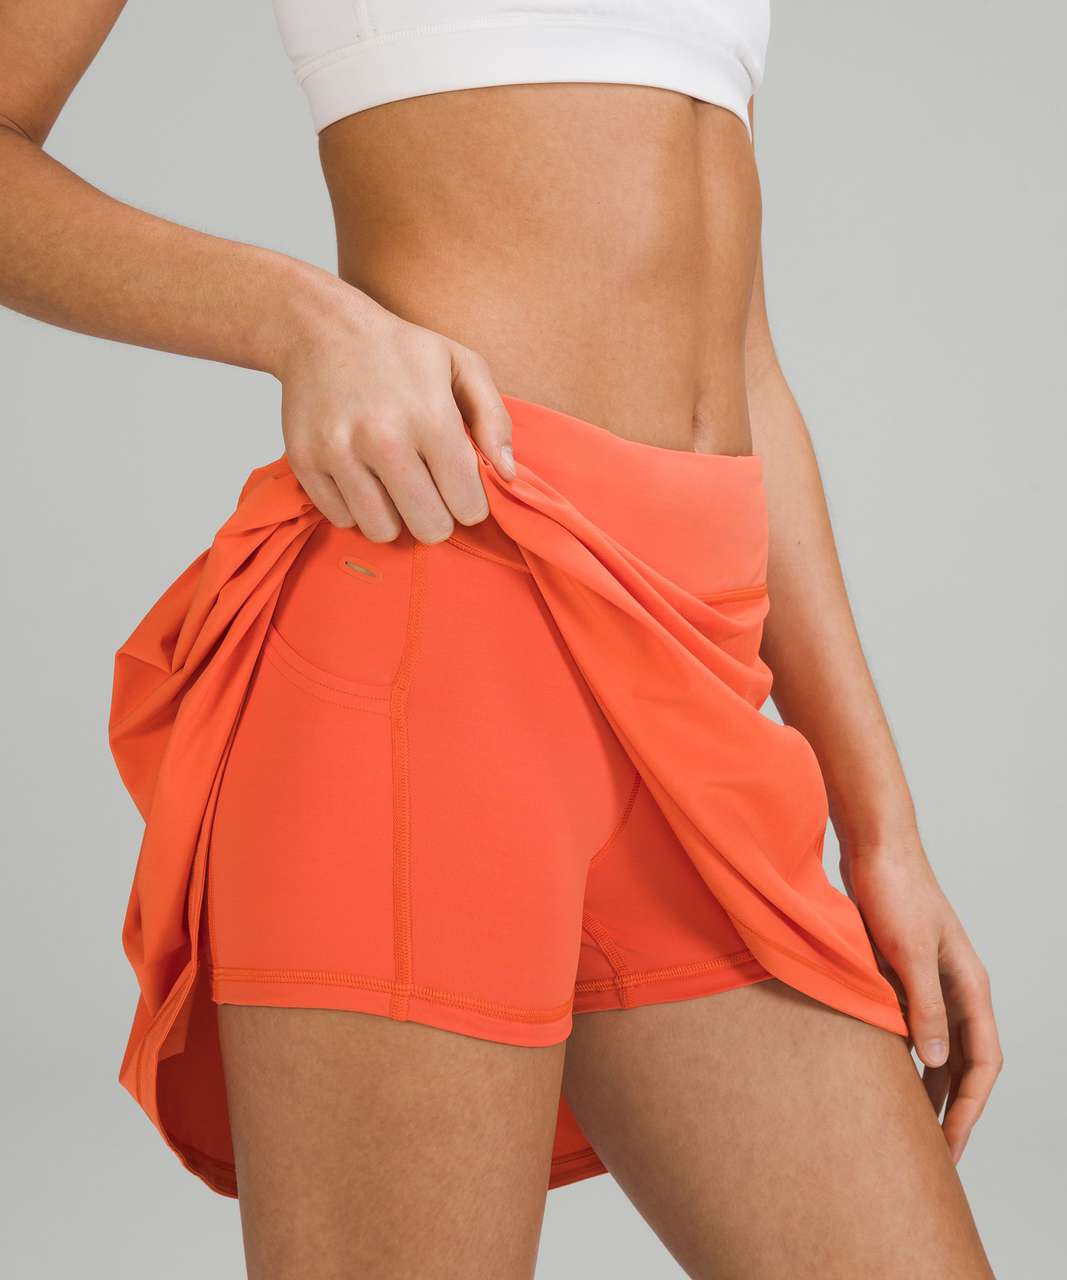 Lululemon Pace Rival Mid-Rise Skirt *Extra Long - Warm Coral